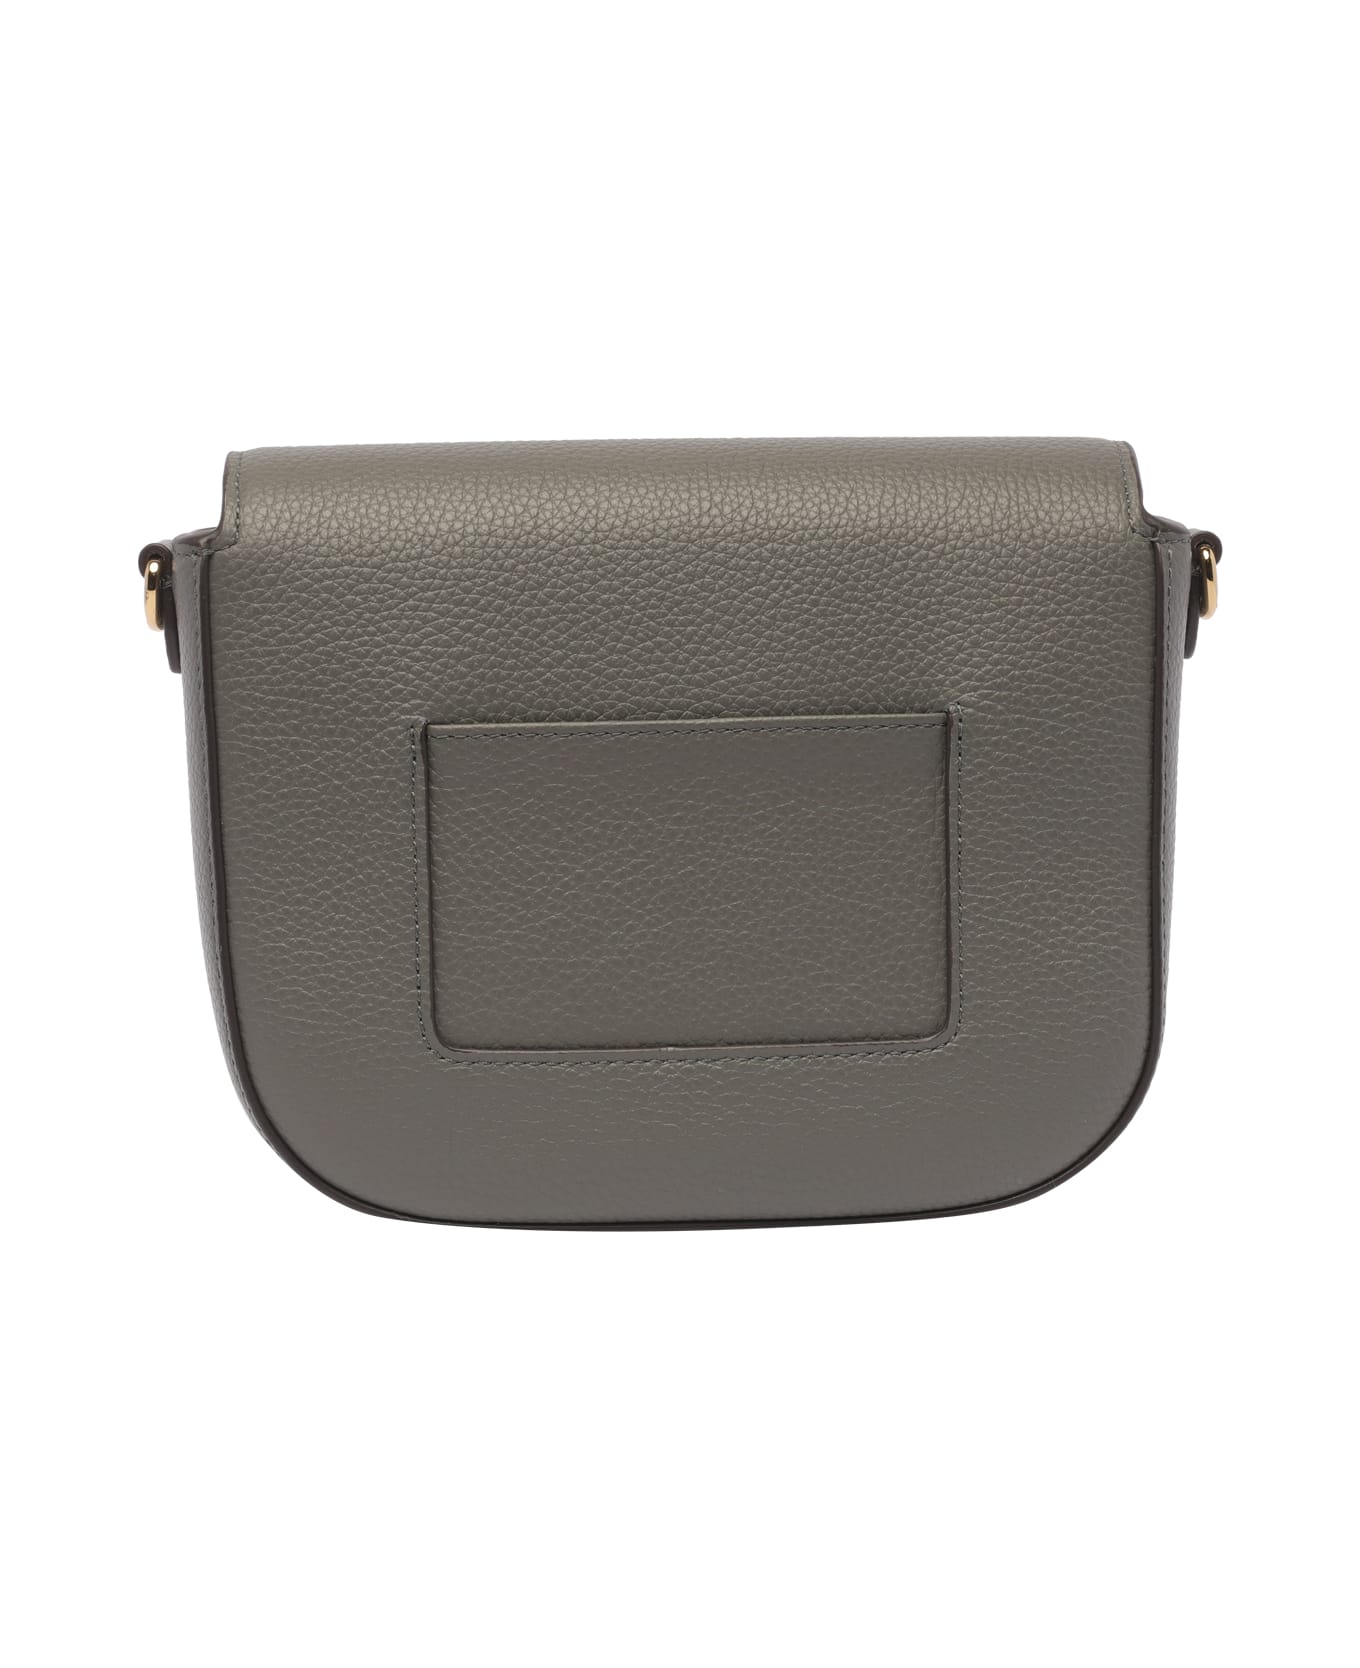 Mulberry Small Darley Satchel Classic Bag - Grey